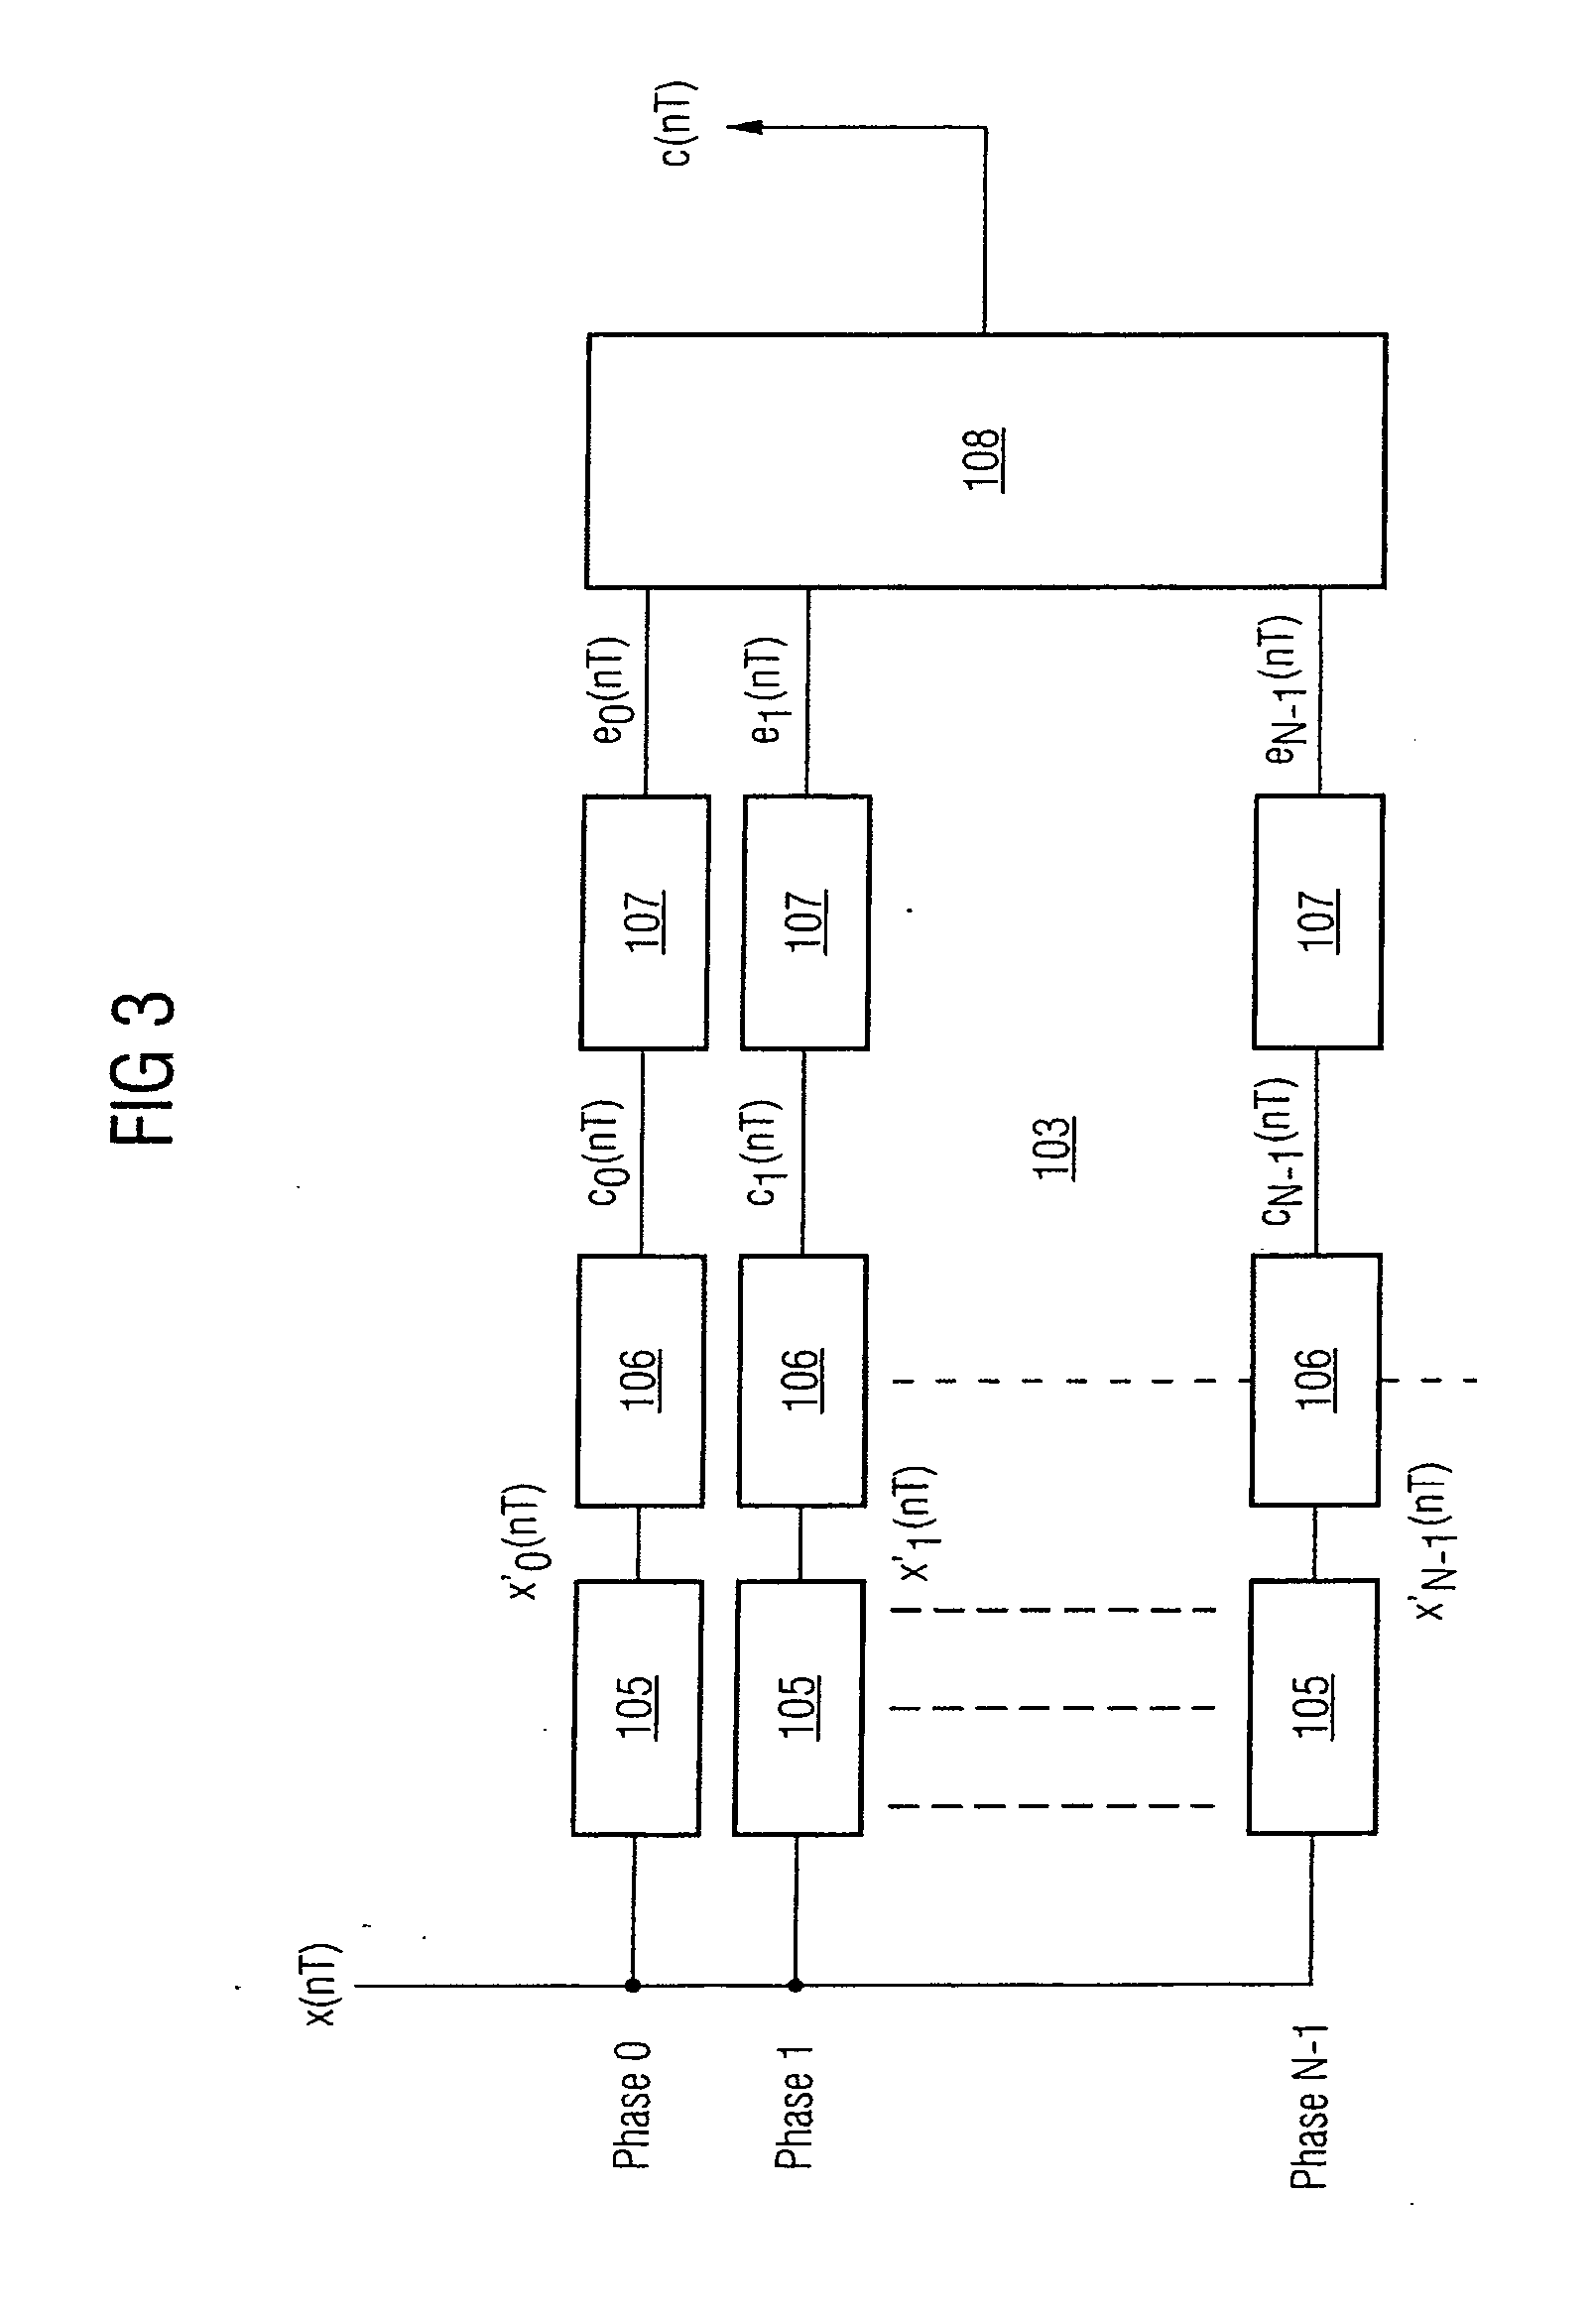 Devices for reducing the dynamic range of signals in transmitters of communication systems